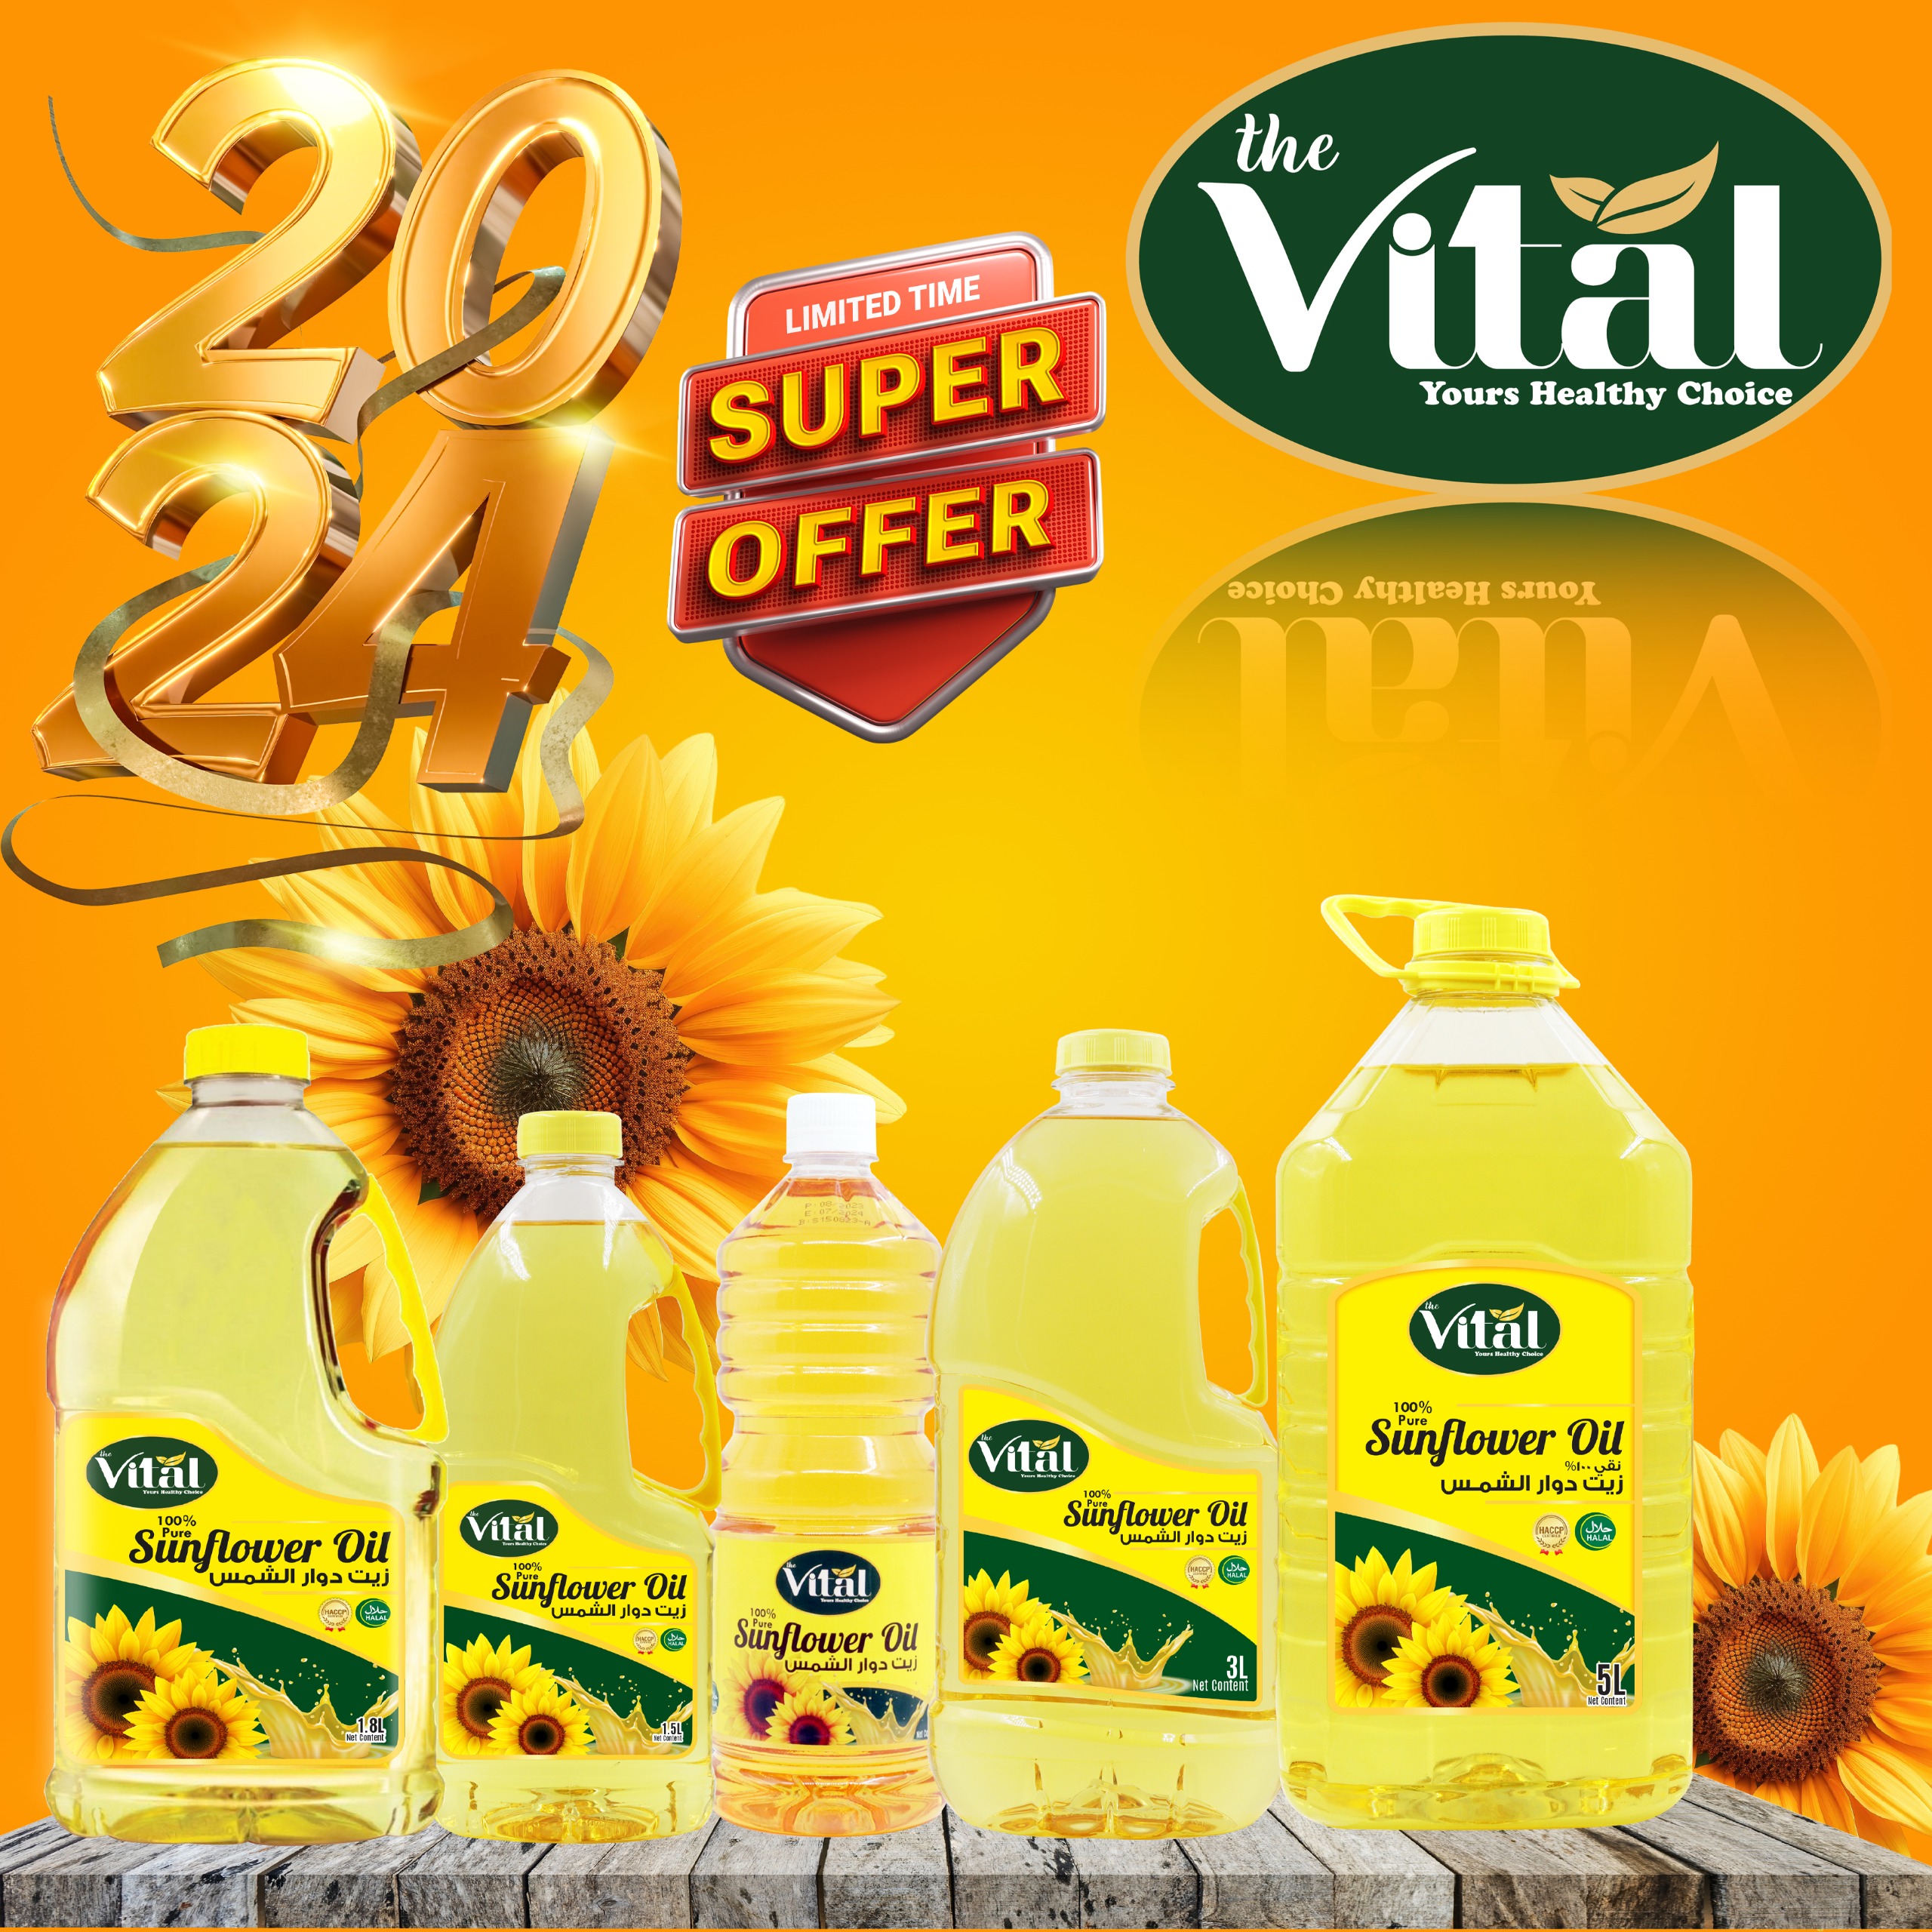 VITAL Sunflower Oil - Private Label Available